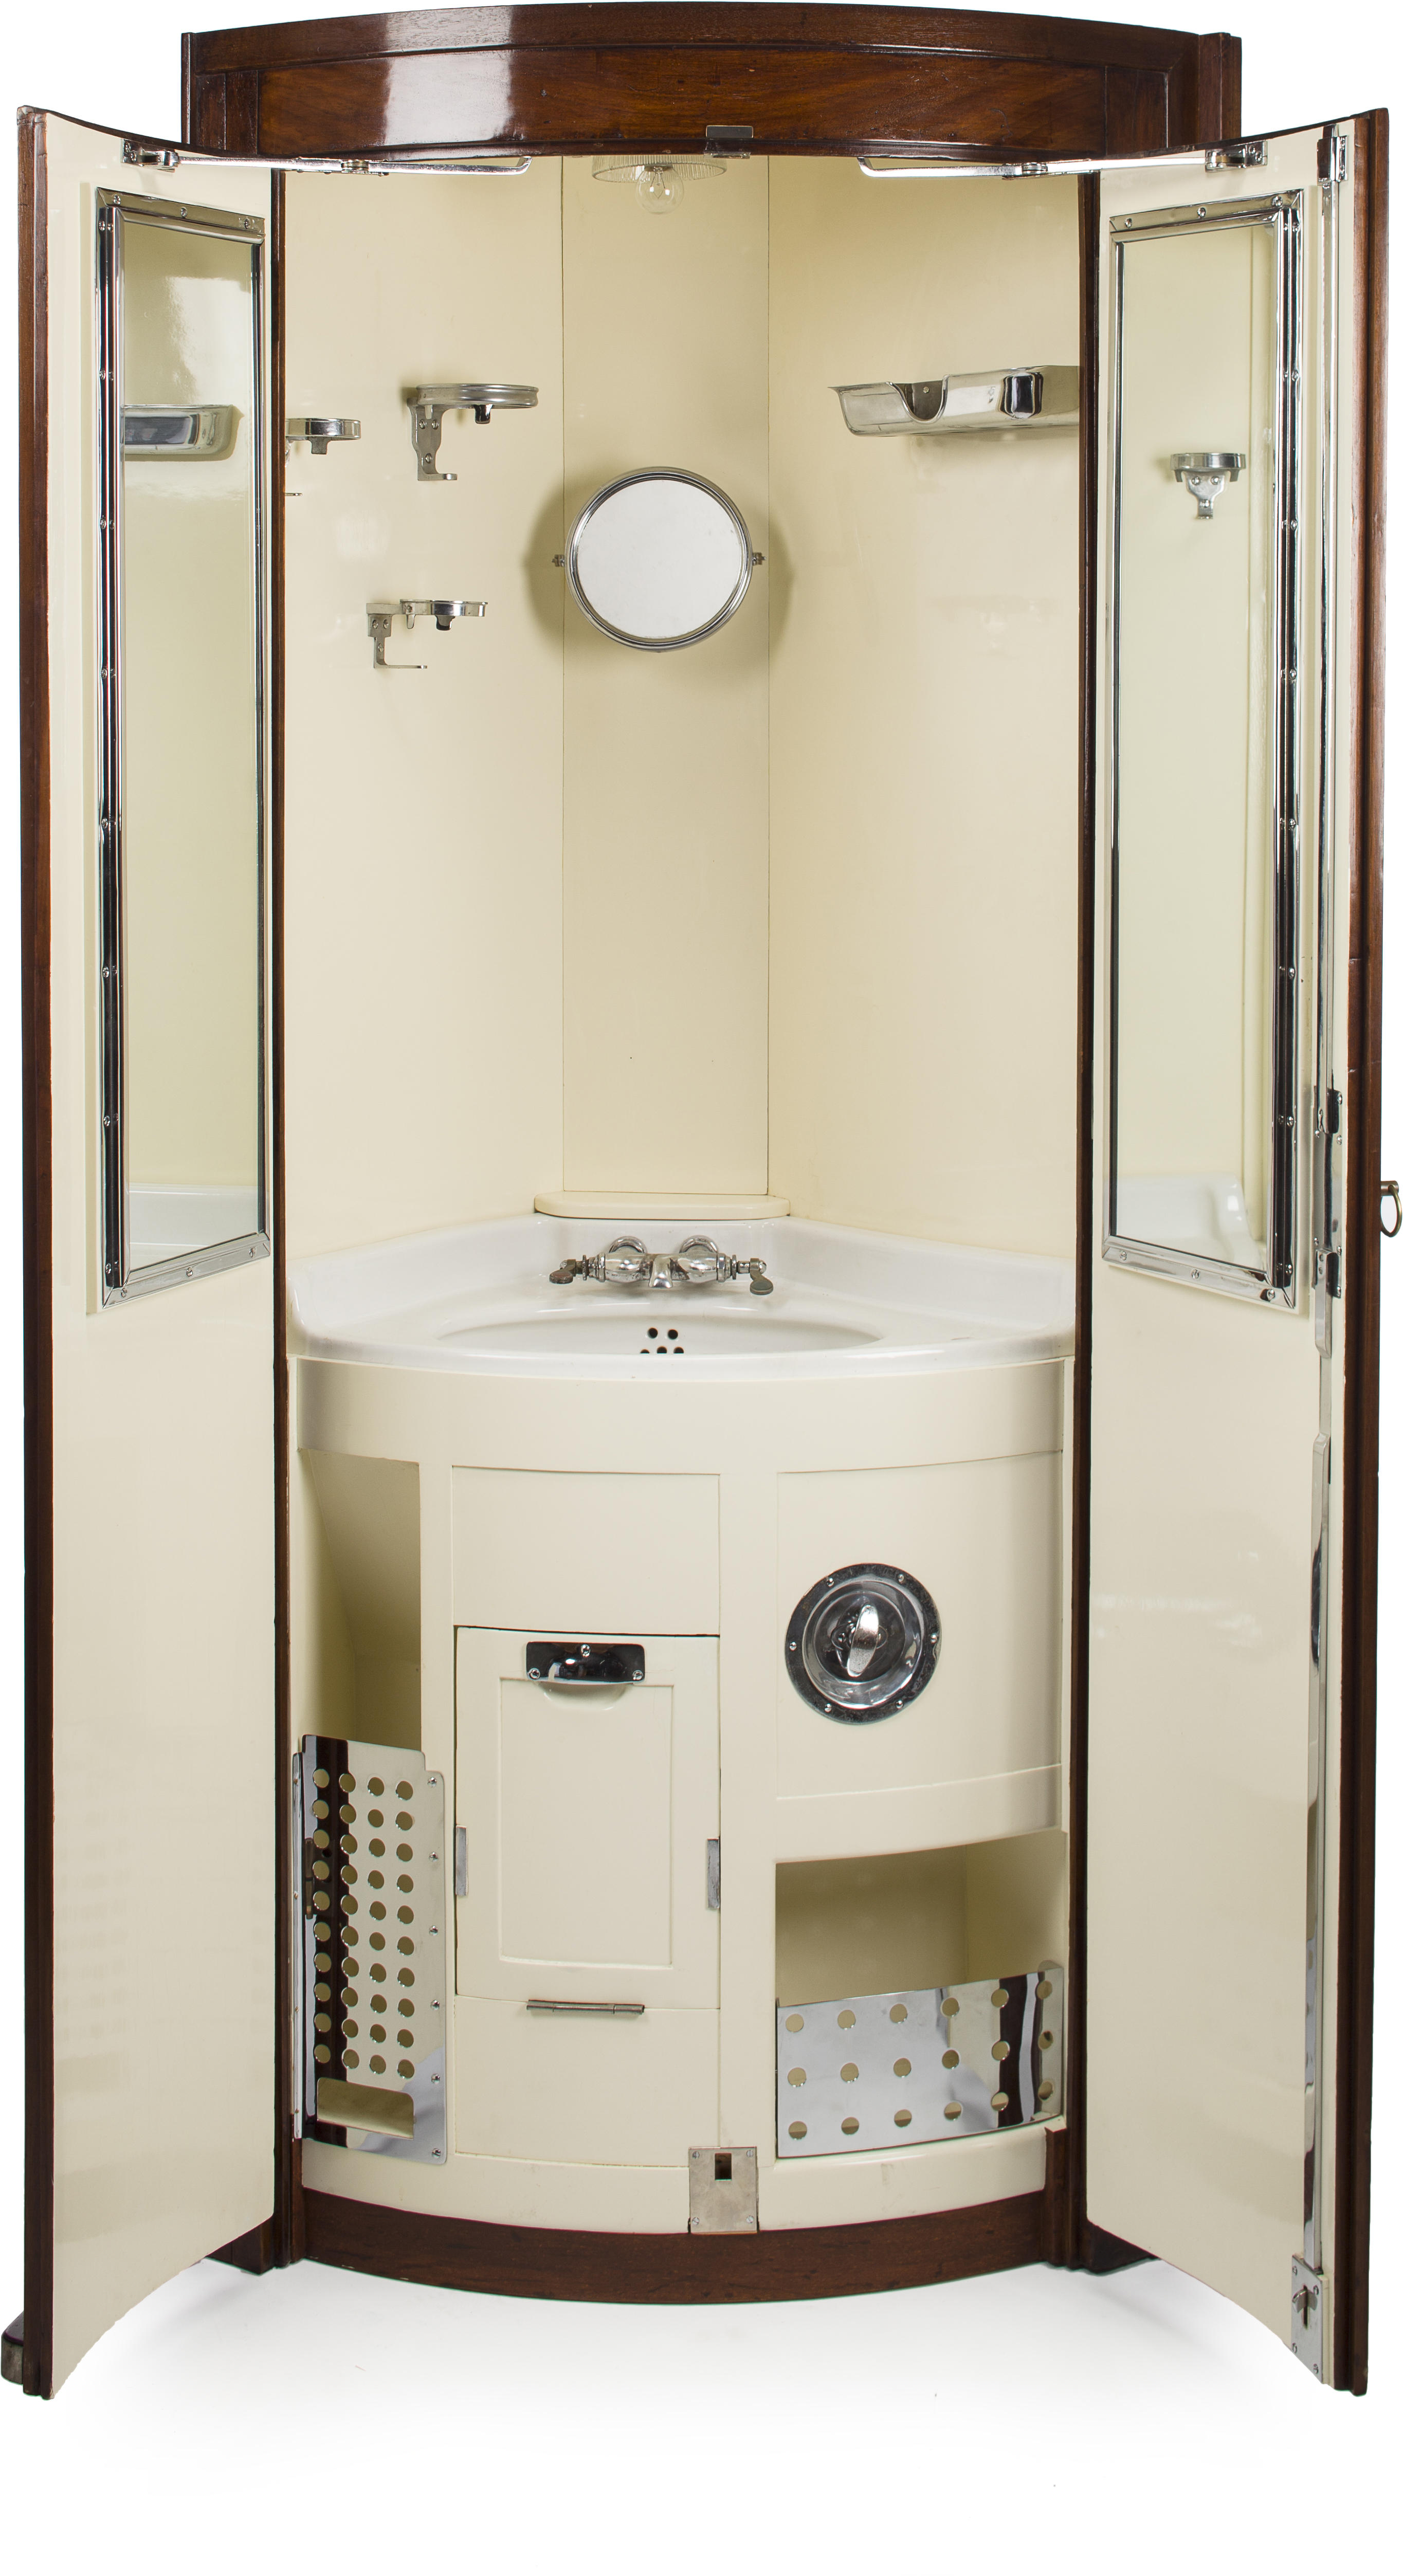 1927 washroom from Orient Express for sale – The History Blog